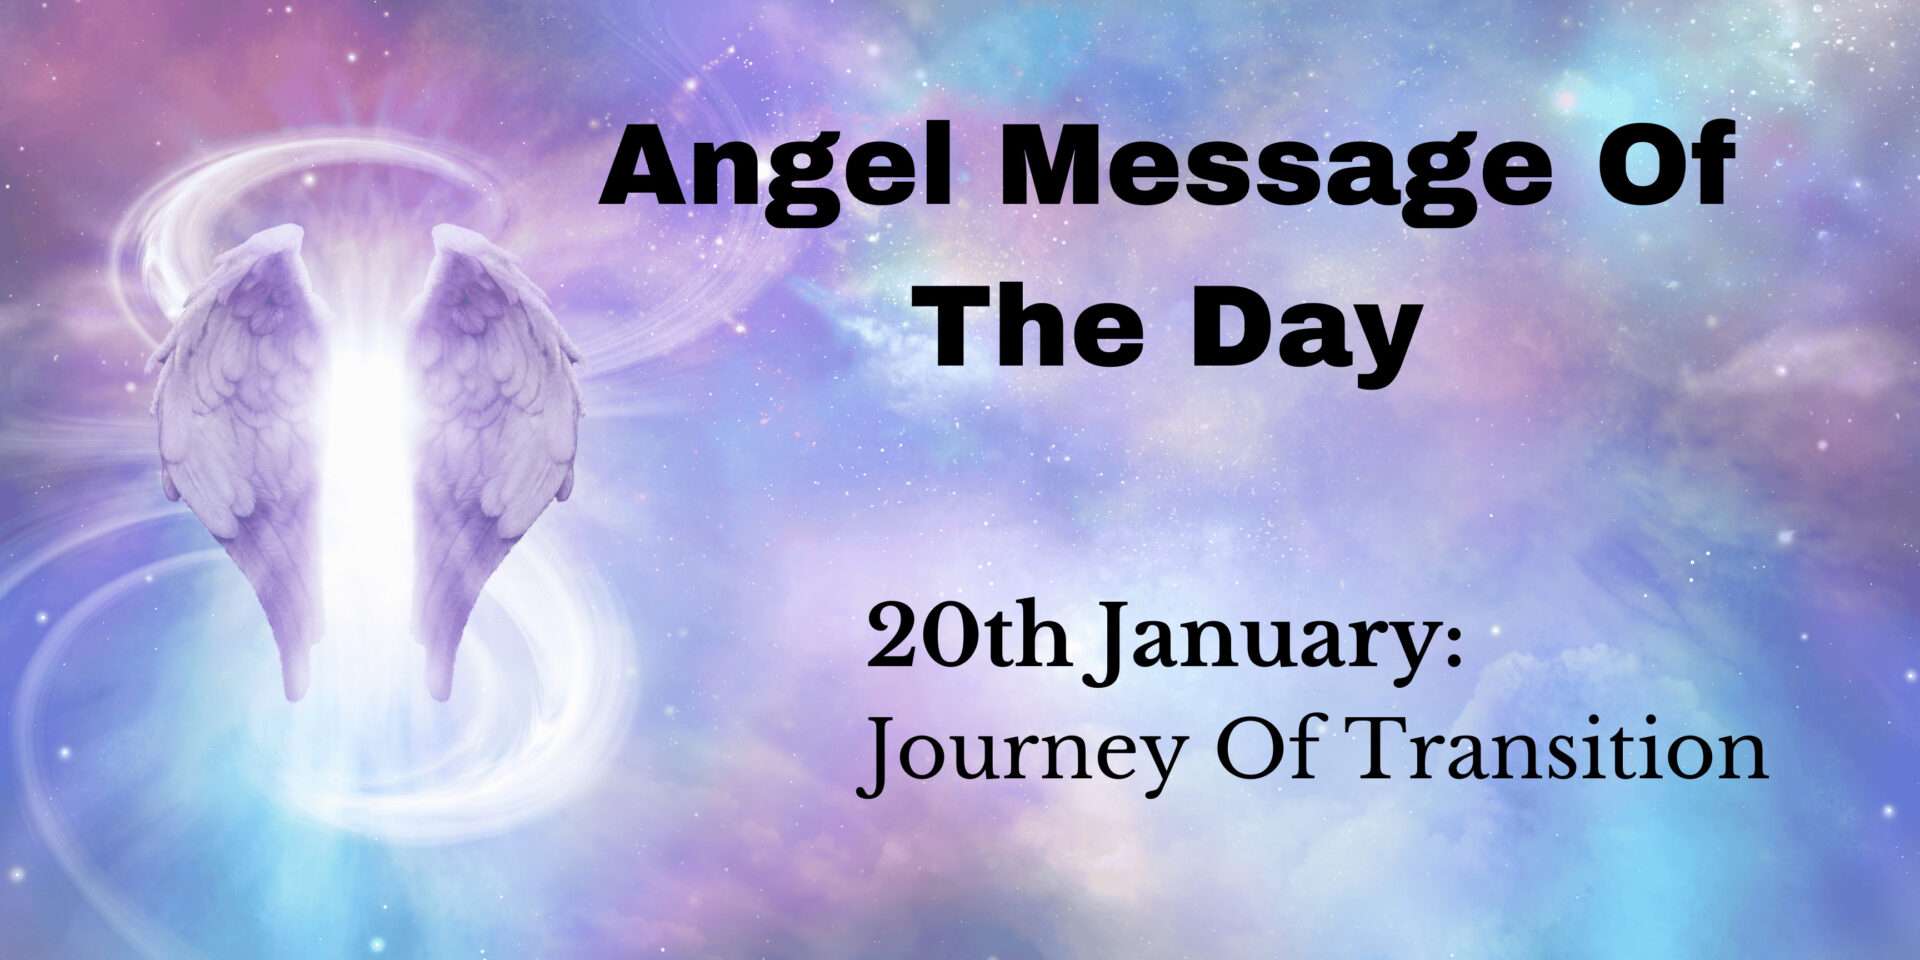 angel message of the day : journey of transition